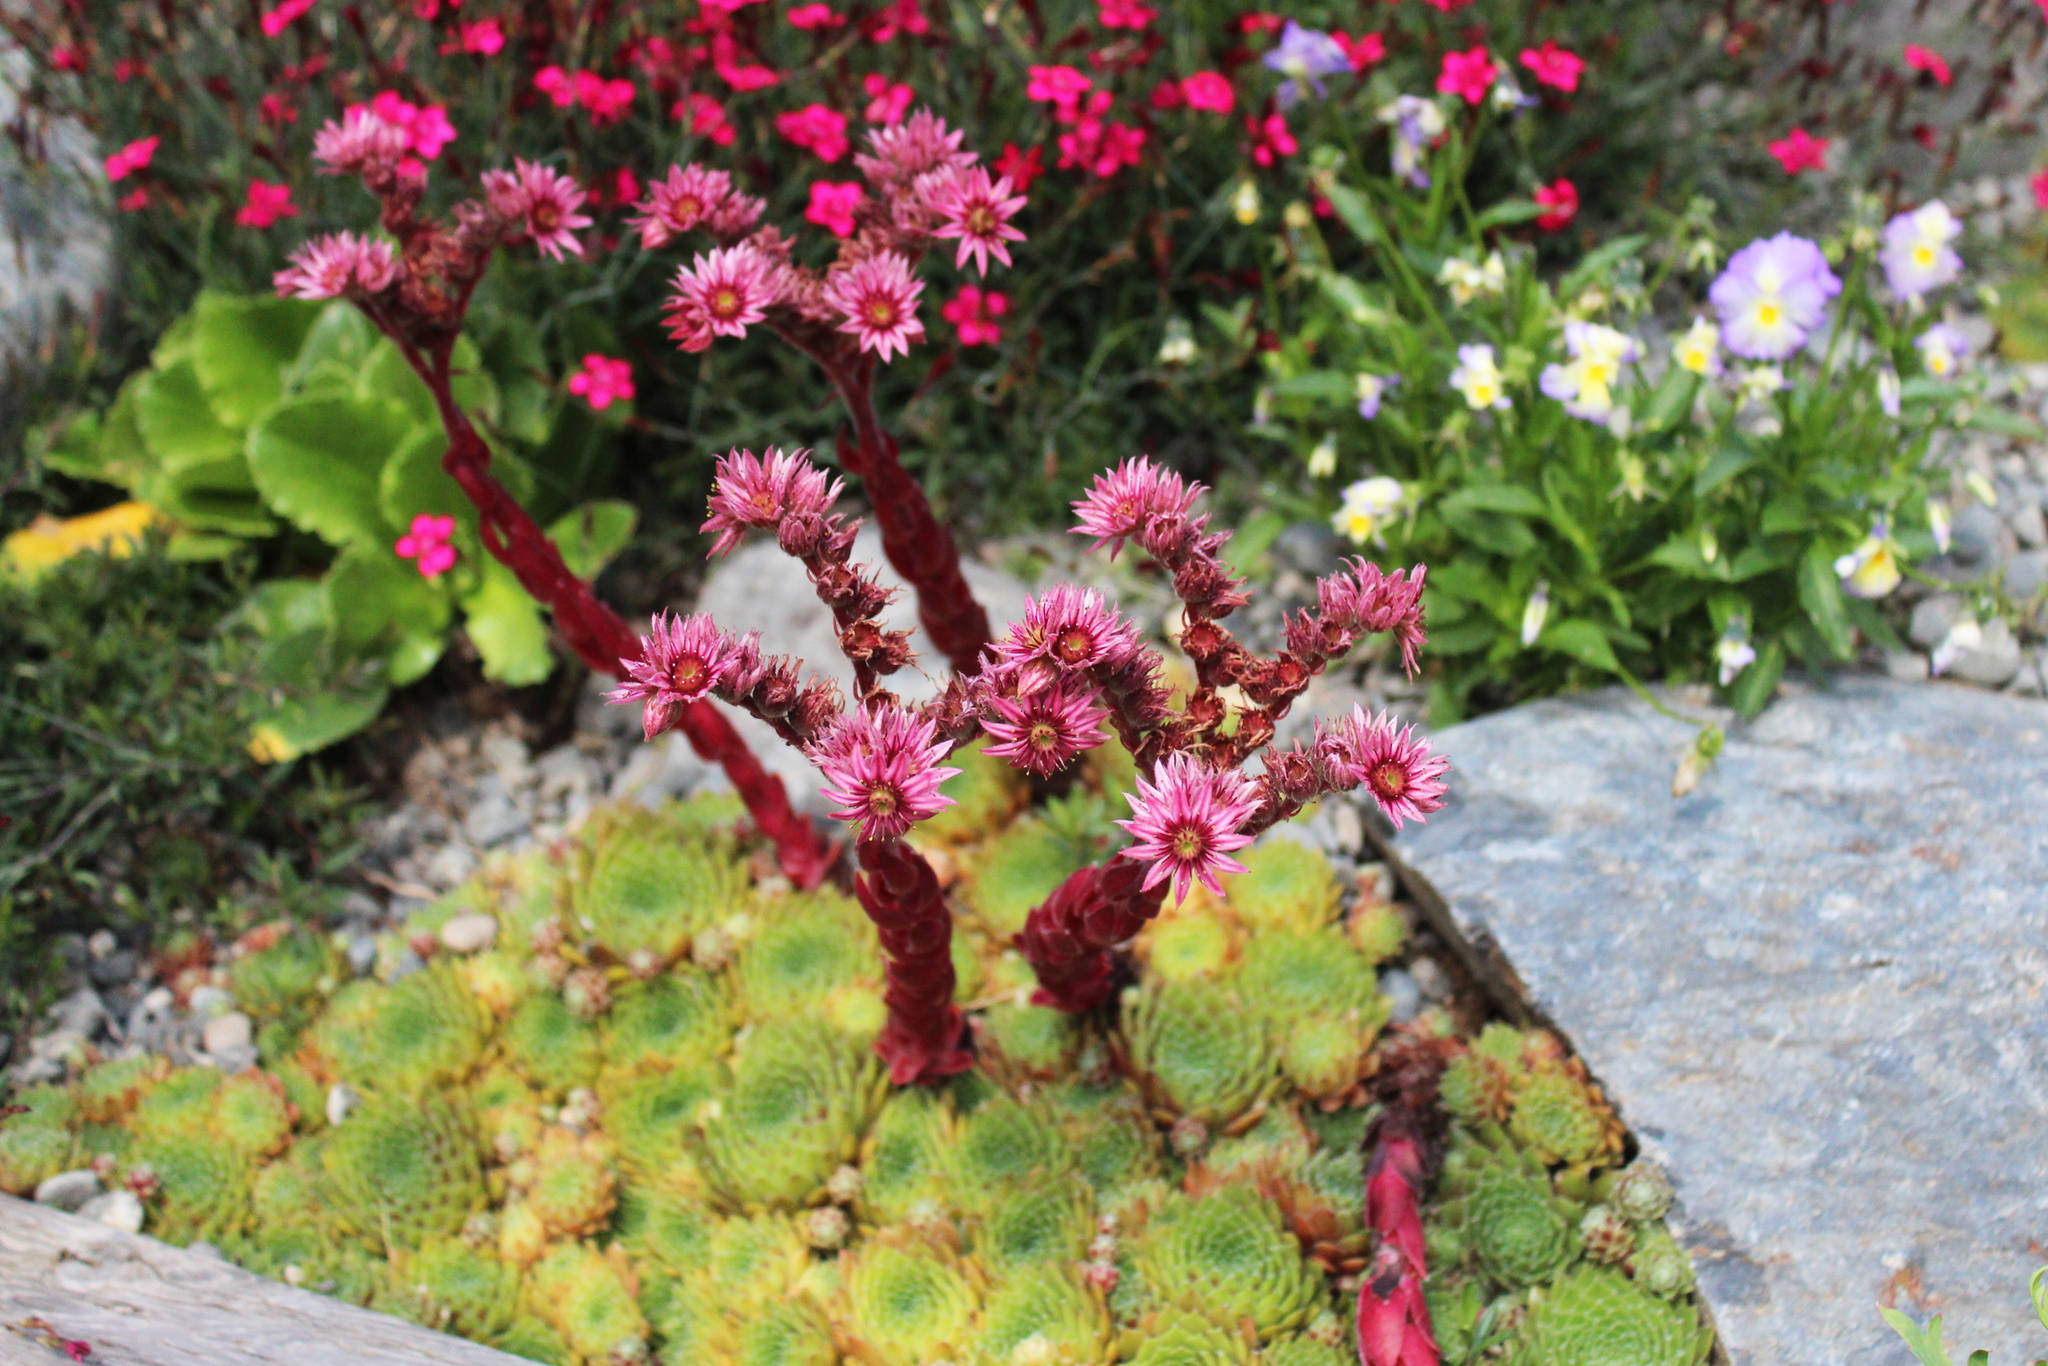 Colorful blooms emerge from a spread of succulents in a garden at Leah Evans Cloud’s home, one of five stops on the annual Garden Tour on Sunday, July 28, 2019 in Homer, Alaska. (Photo by Megan Pacer/Homer News)